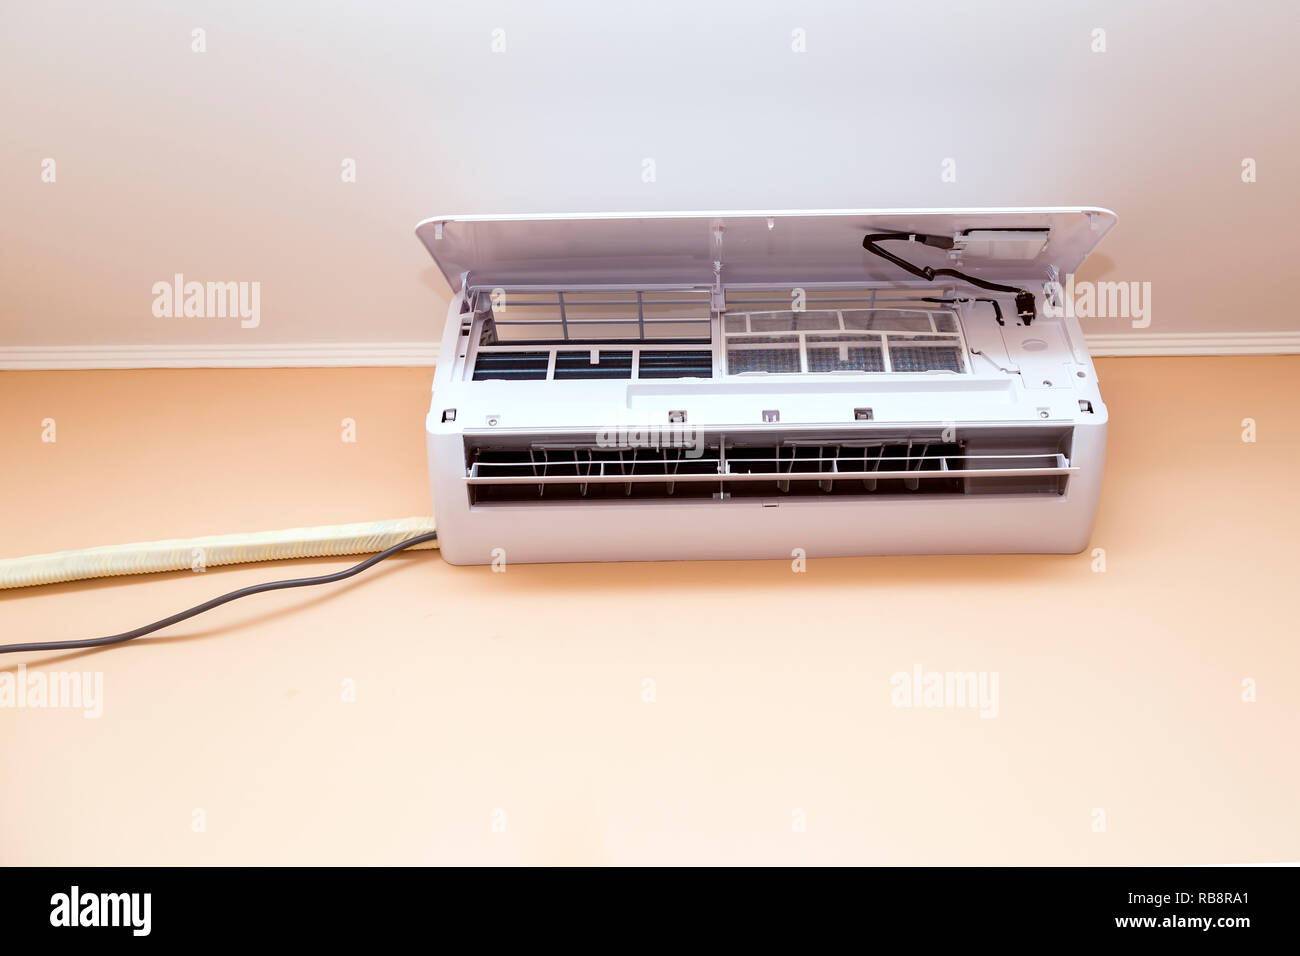 Wall-mounted air conditioner for cleaning Stock Photo